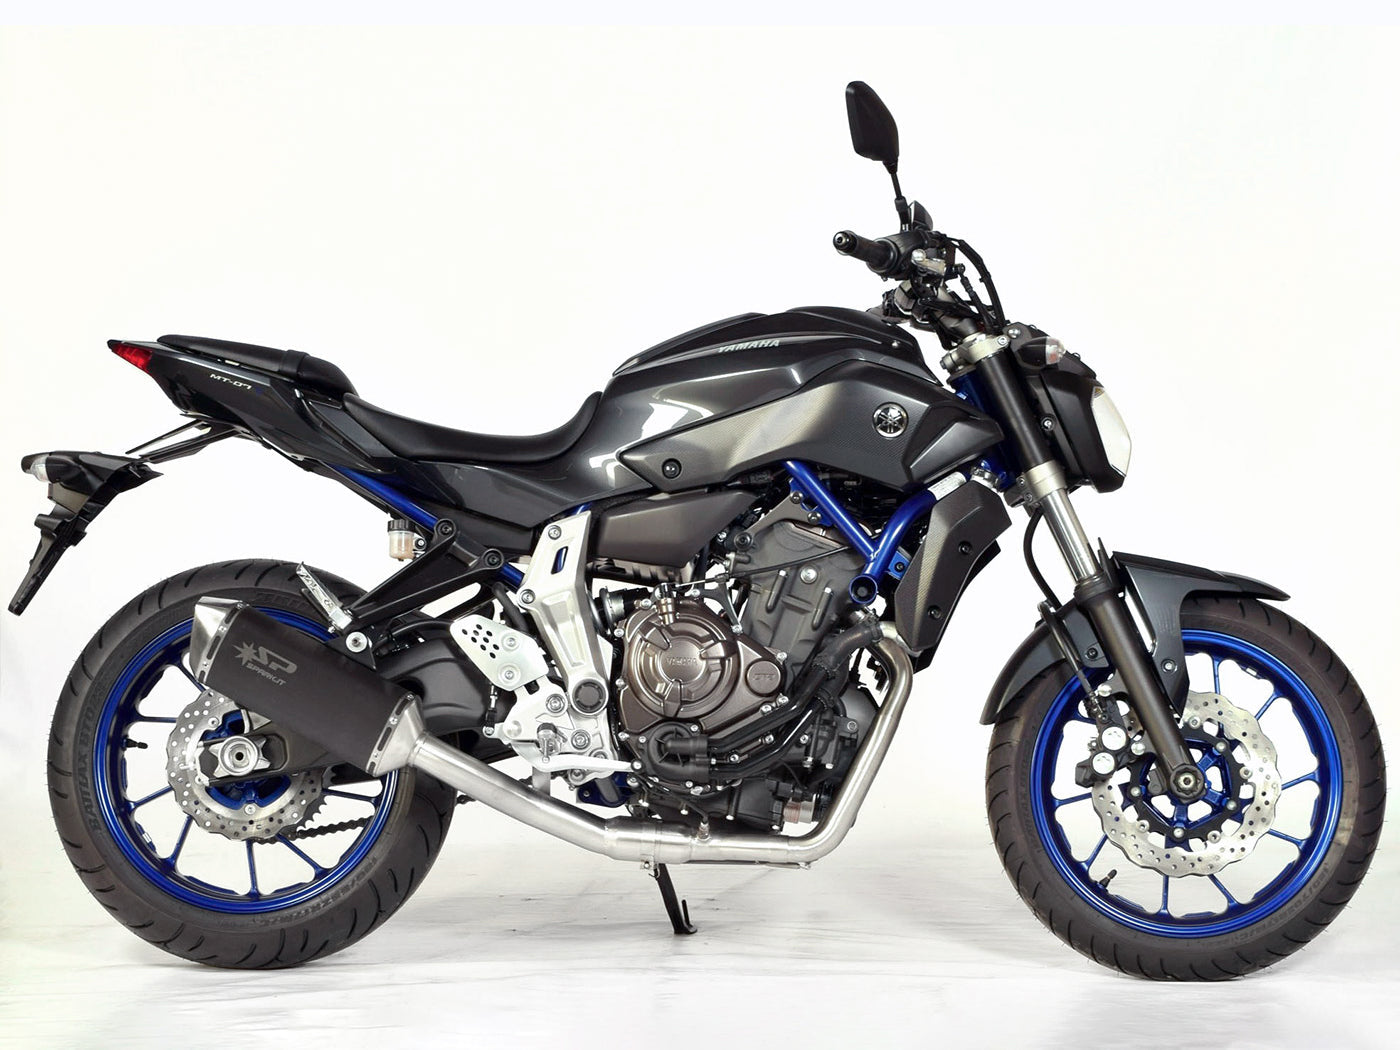 SPARK GYA8821 Yamaha MT-07 Full Exhaust System "Force" (EU homologated; lateral position)